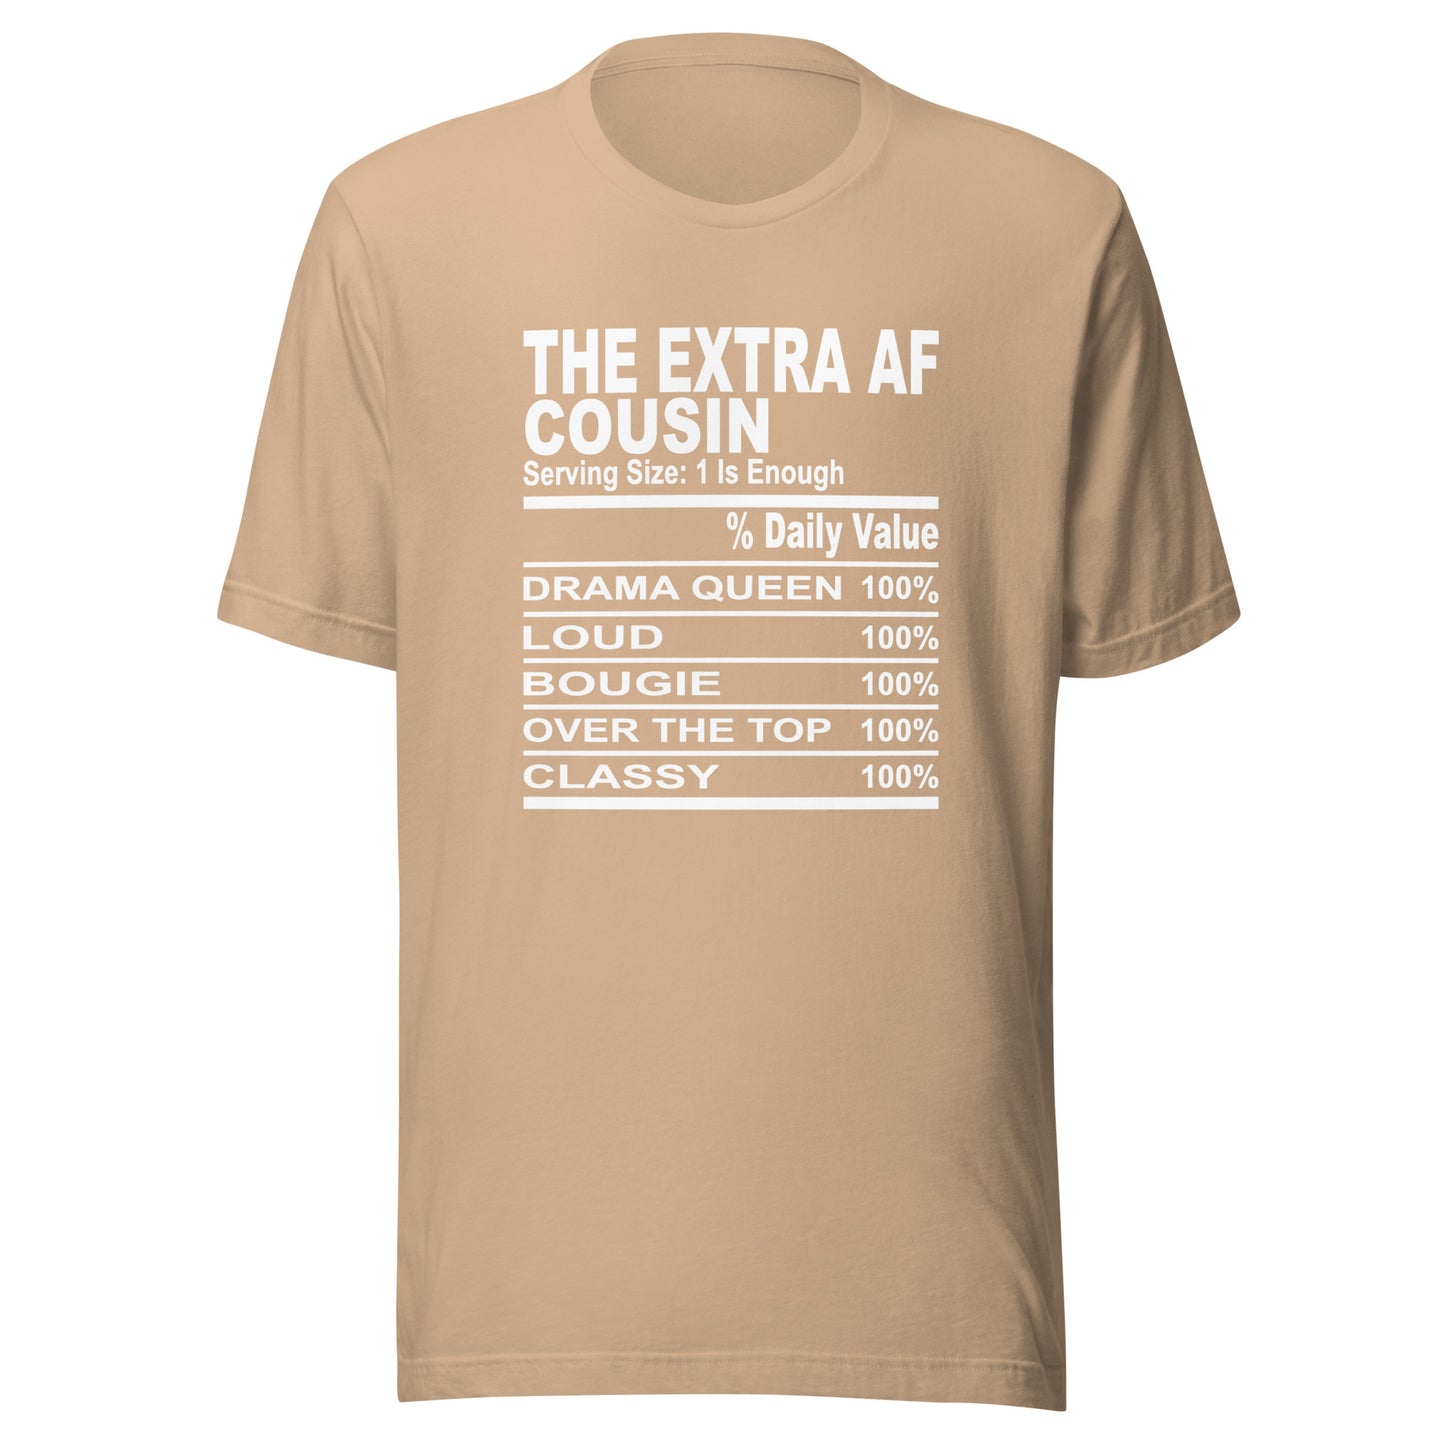 THE EXTRA AF COUSIN - 2XL-3XL - Unisex T-Shirt (white print)